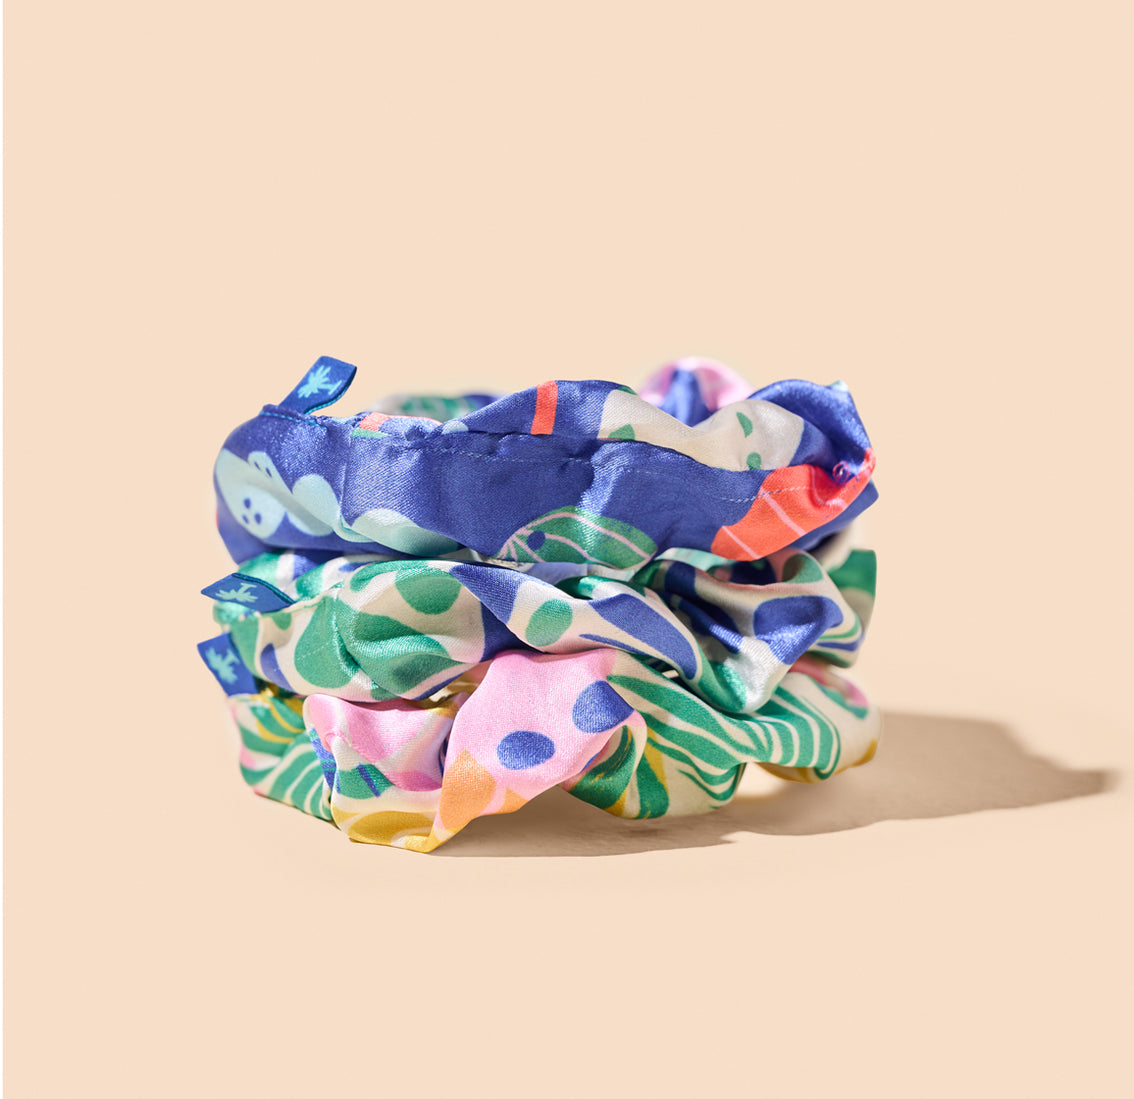 A vibrant Vita Coco scrunchie with a tropical pattern, perfect to add a pop of color to your hair.